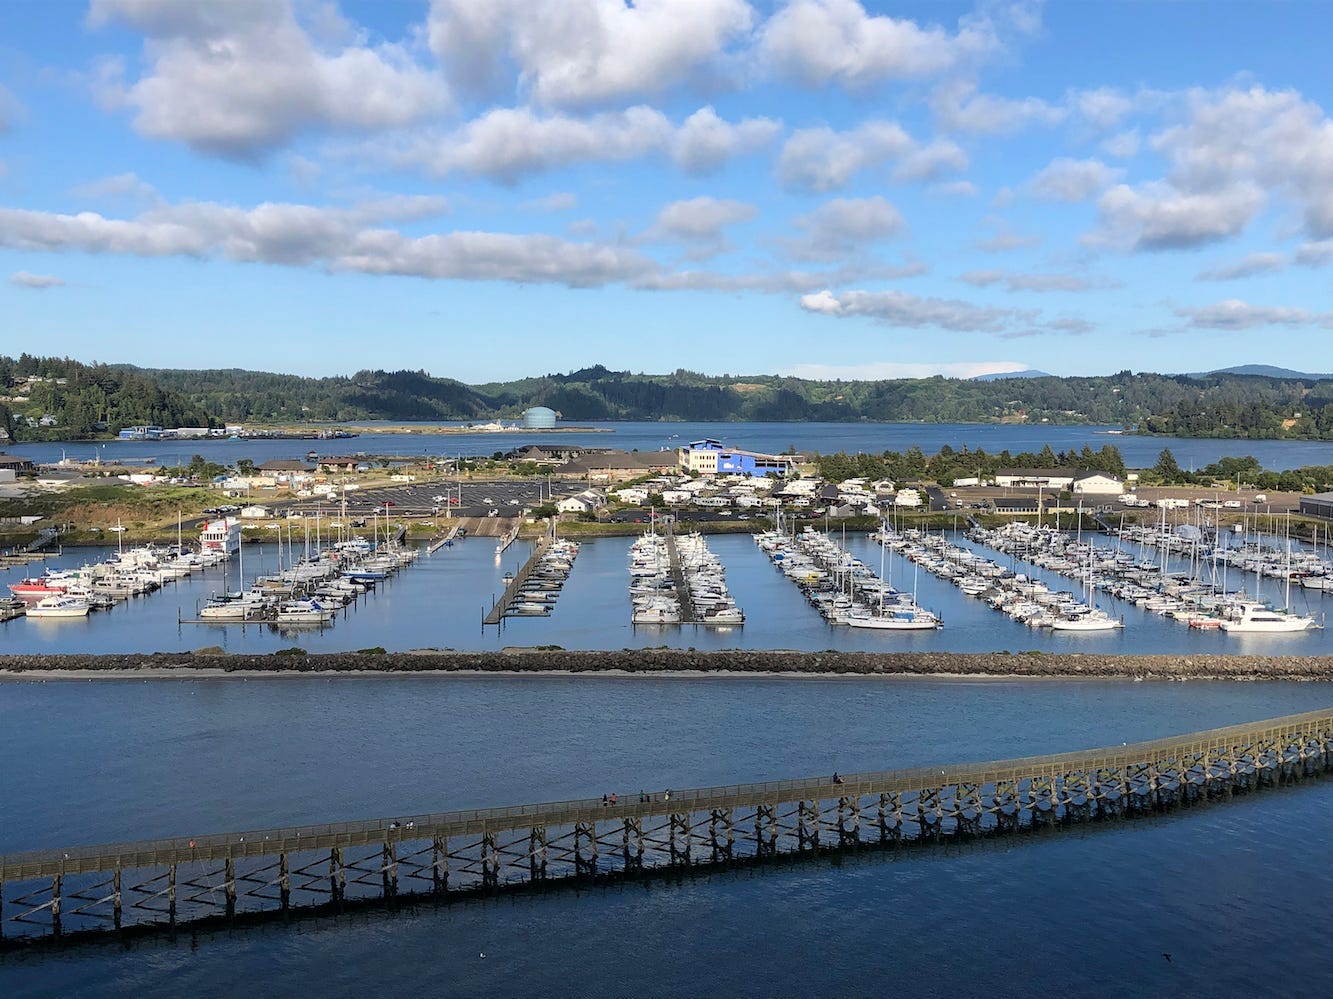 Oregon State University's Marine Studies Building, which is under construction in a tsunami inundation zone, is viewed from the Yaquina Bay Bridge in Newport, Ore. The building, center right, is surrounded by Yaquina Bay. The Oregon Legislature appears poised to continue to allow construction of critical facilities in tsunami inundation zones, a move slammed by critics, July 22, 2019.